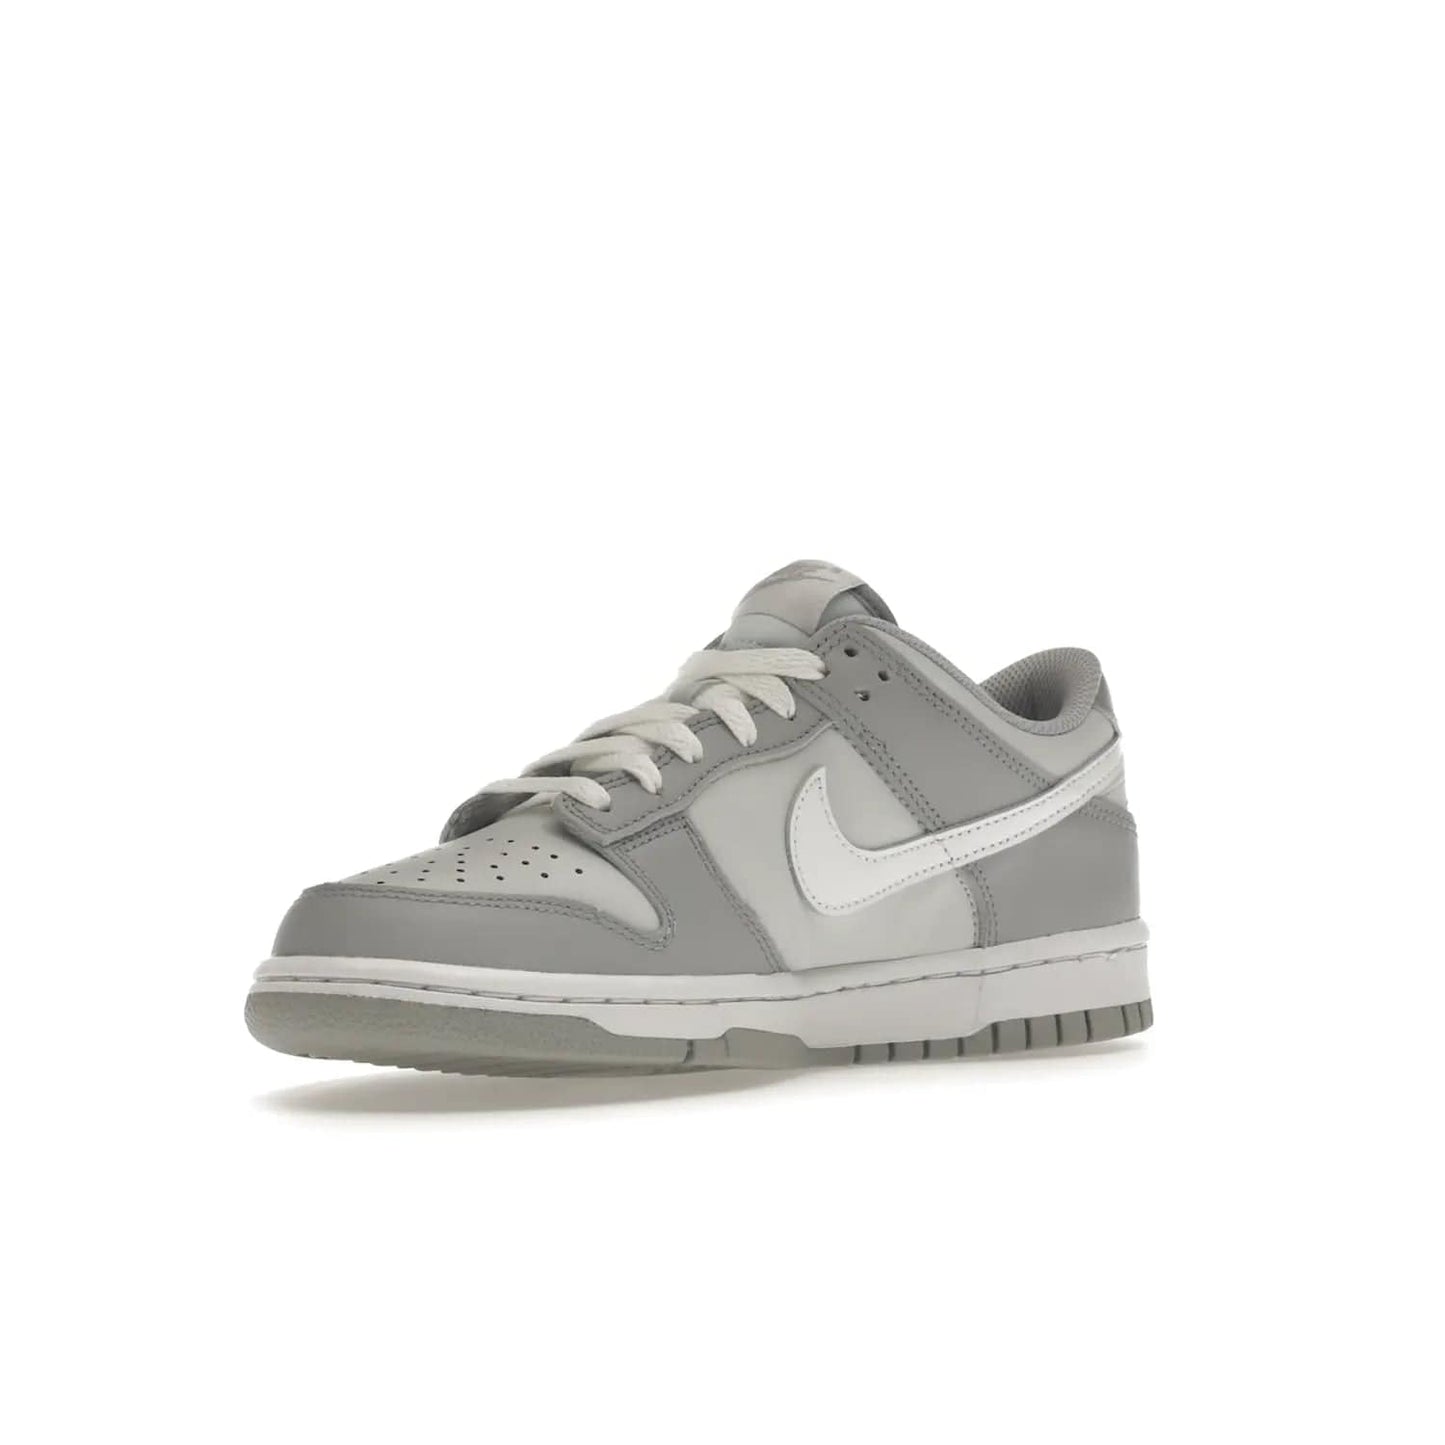 Nike Dunk Low Two-Toned Grey (GS) - Image 15 - Only at www.BallersClubKickz.com - Stylish Nike Dunk Low GS Two-Toned Grey featuring leather build, light/dark grey shades, white Swoosh logo & gray rubber outsole. Get ready to make a statement with this timeless classic released in March 2022.